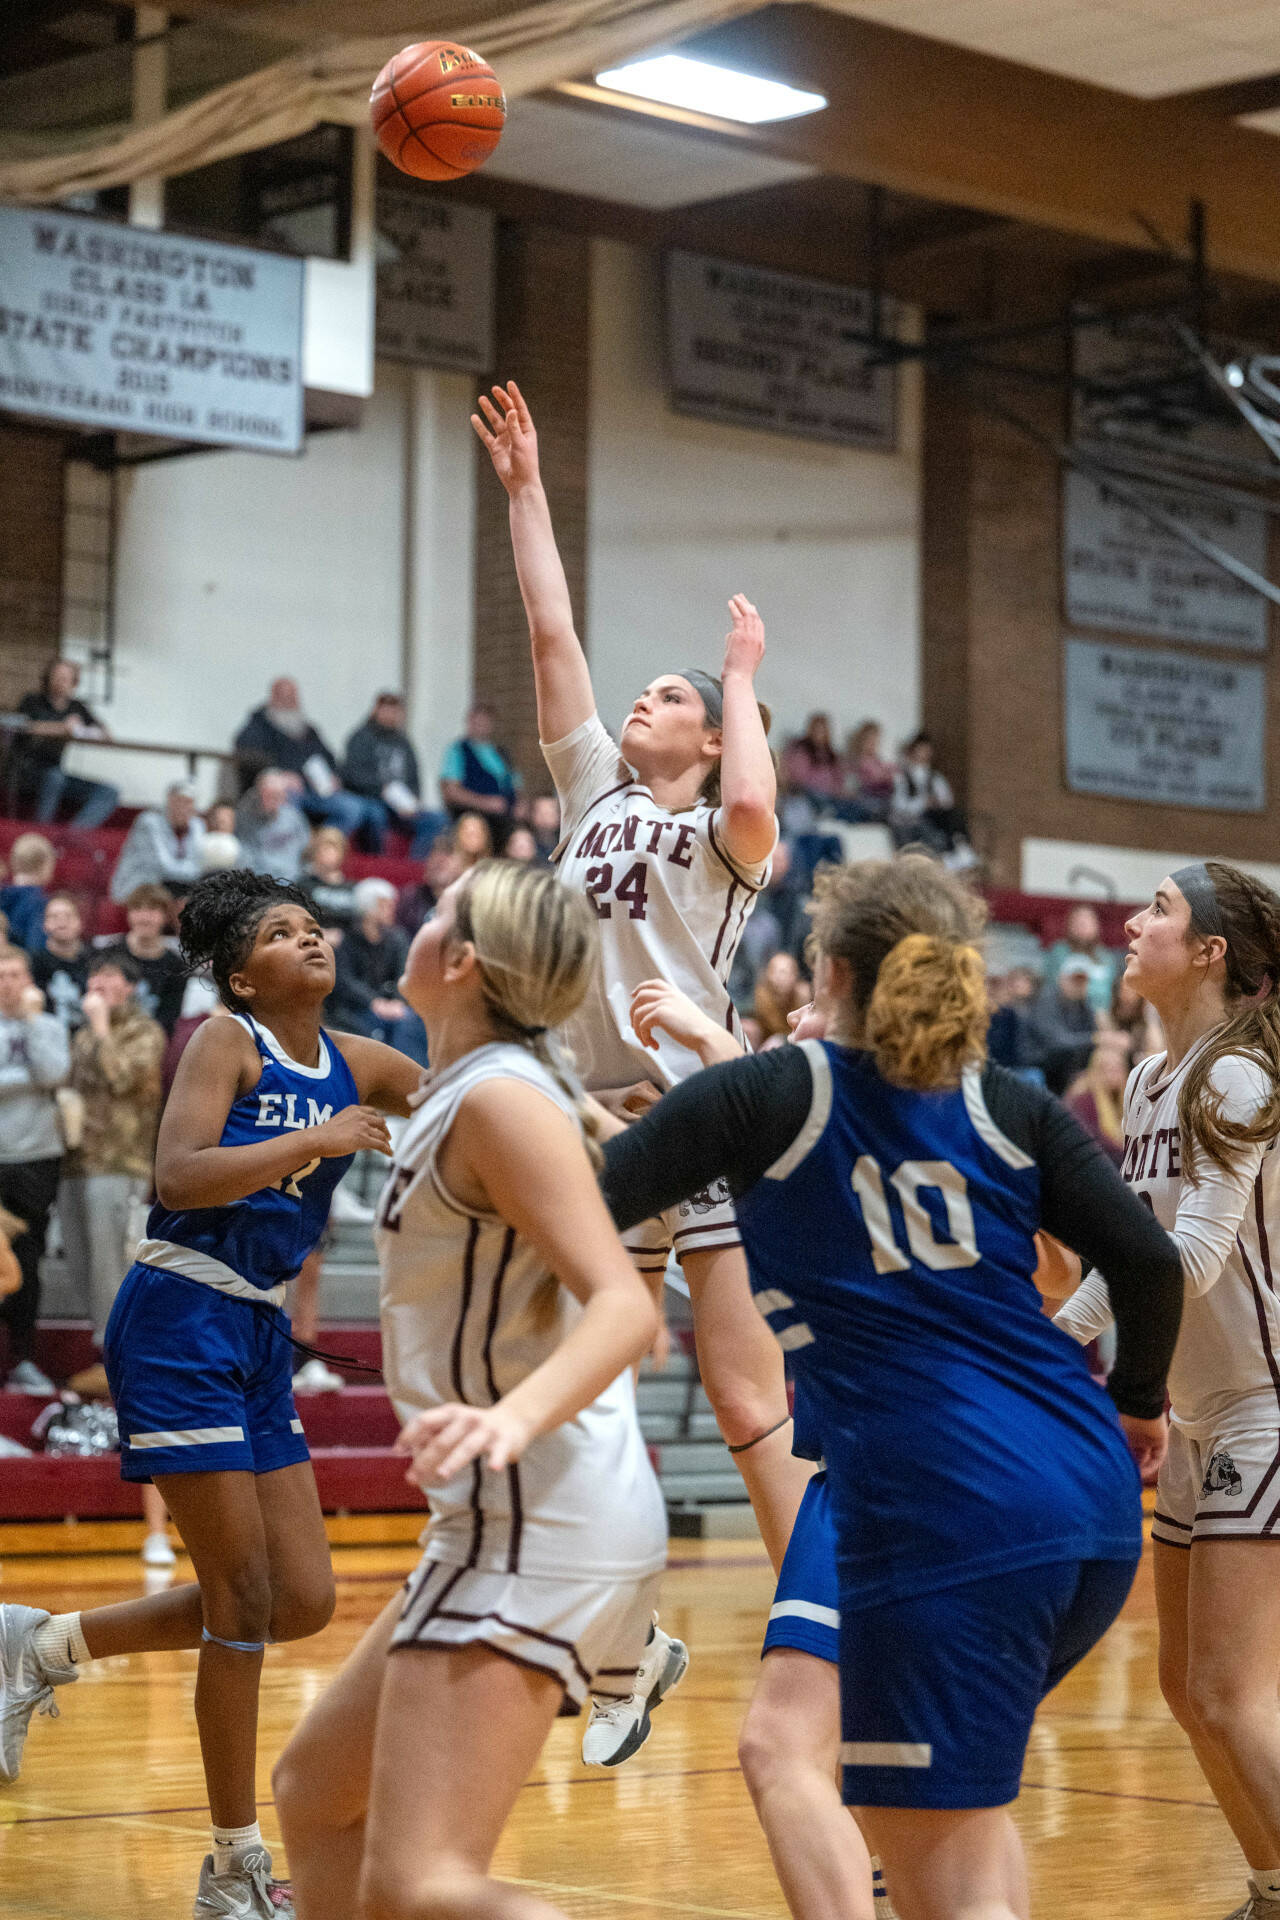 PHOTO BY FOREST WORGUM Montesano’s Jillie Dalan (24) shoots during the Bulldogs’ 37-22 win over Elma in a 1A District 4 semifinal game on Saturday in Montesano.